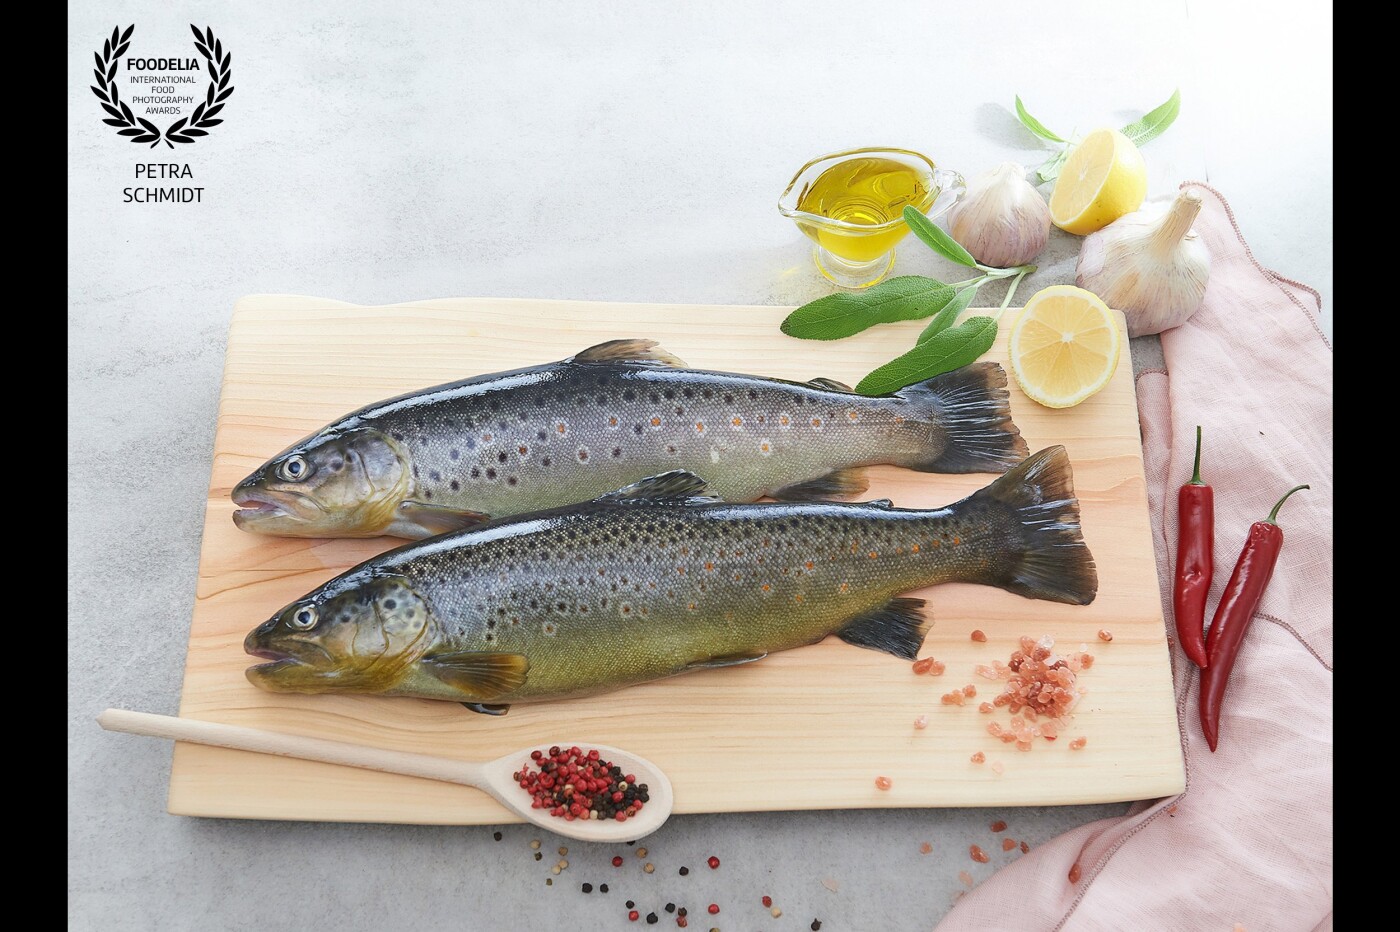 this picture was made for a client who produces organic fish.  it is used now for the online shop of this company. important was to keep the freshness of the fish. It is one photo out of a series of 10.